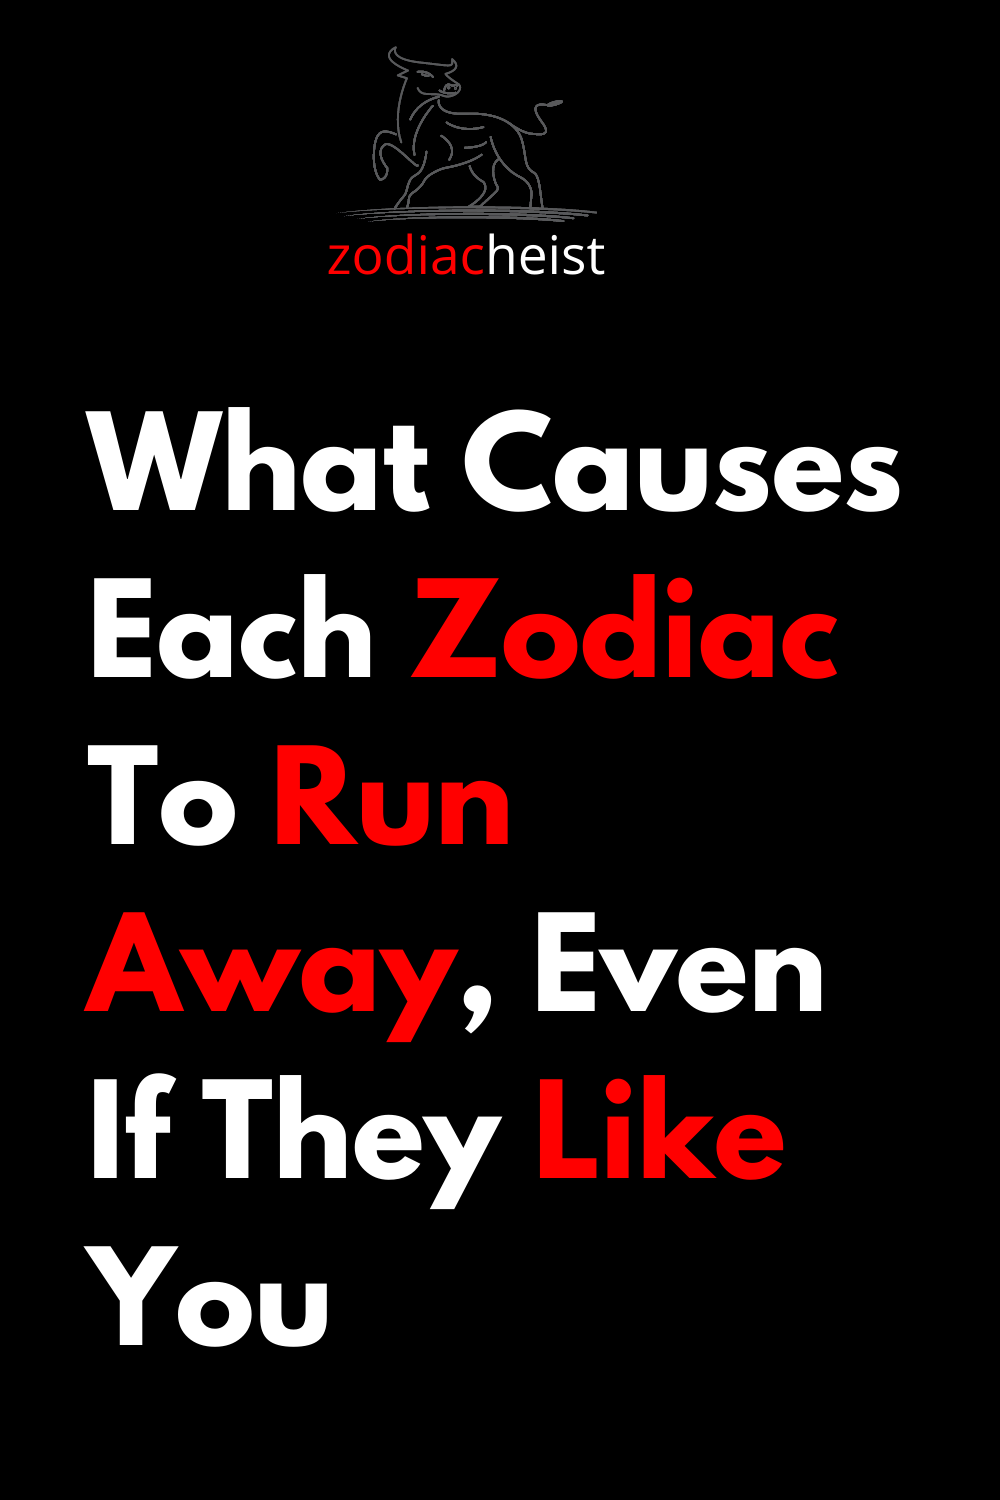 What Causes Each Zodiac To Run Away, Even If They Like You